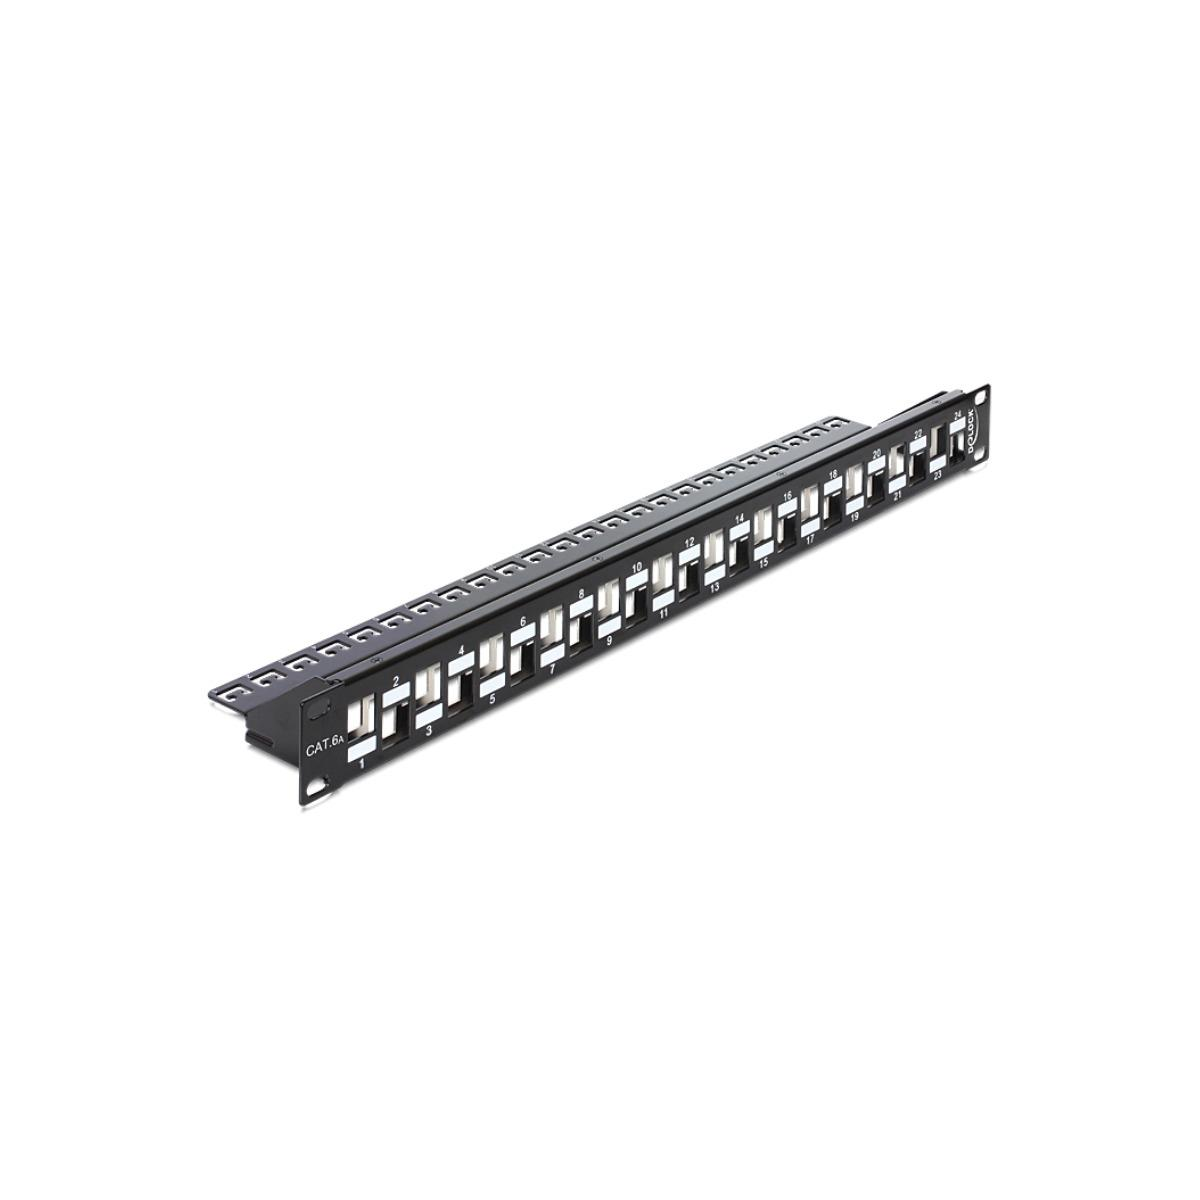 Patchpanel DELOCK 43278